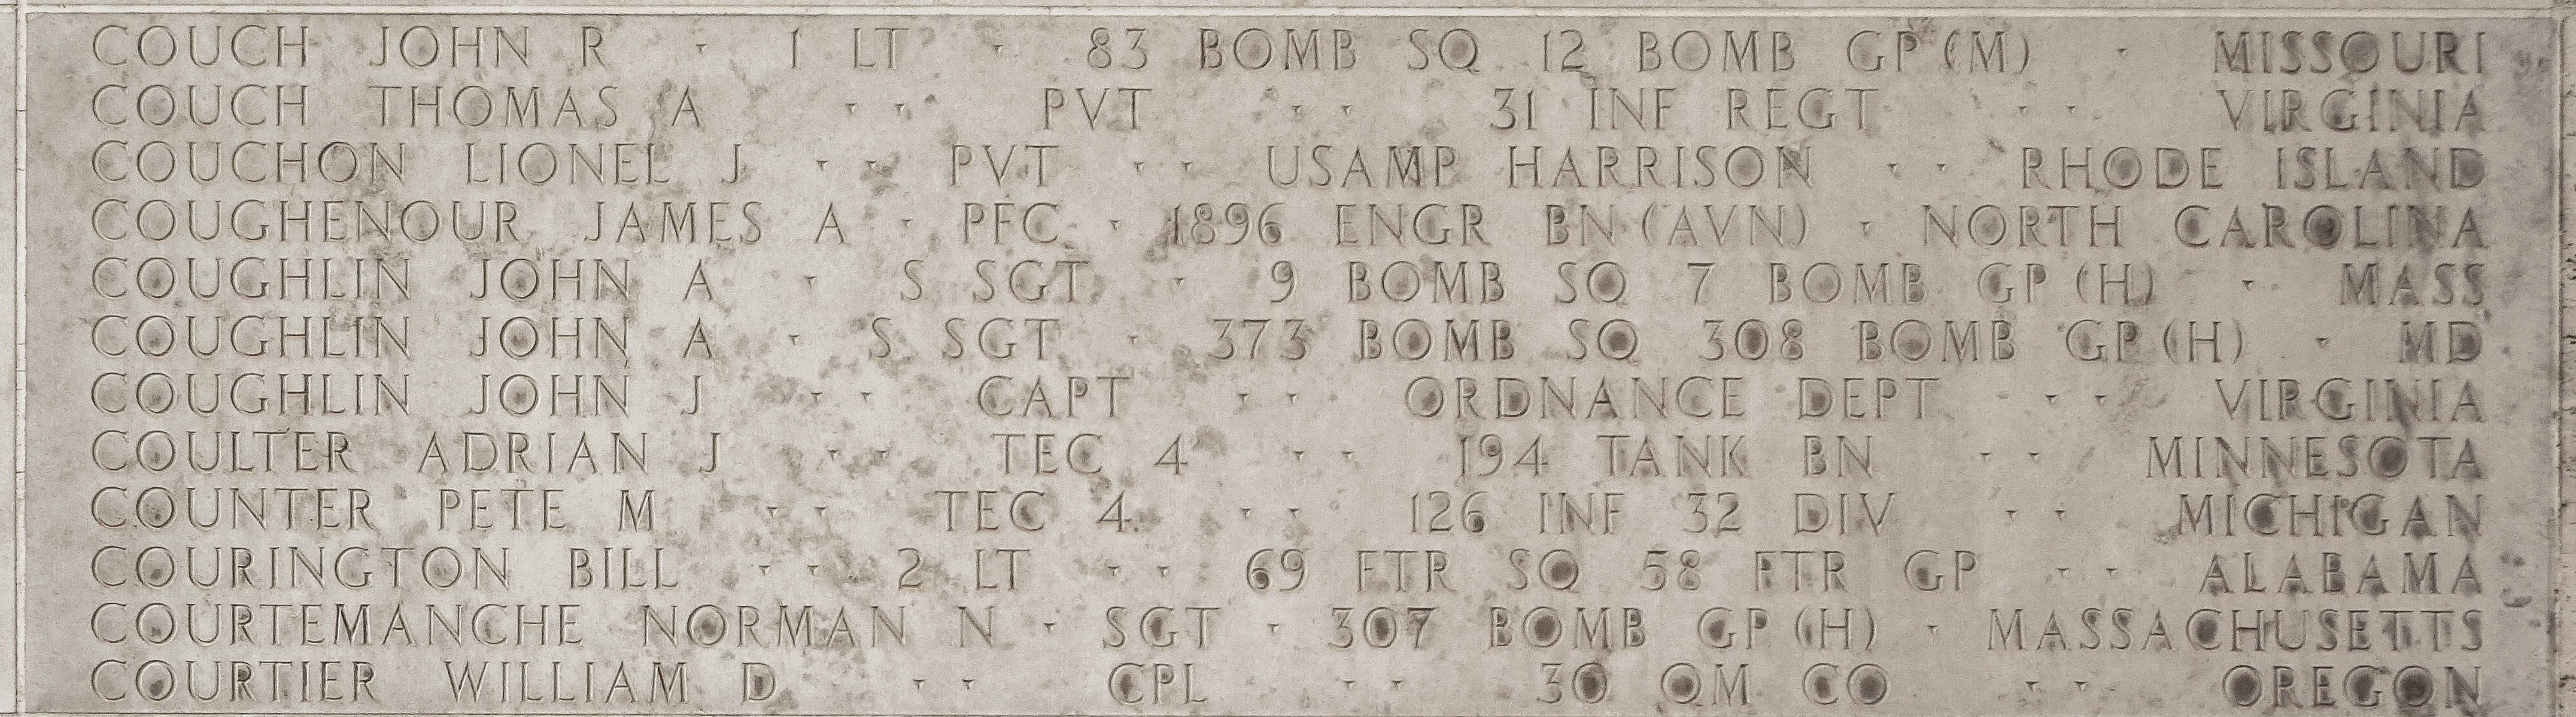 James A. Coughenour, Private First Class